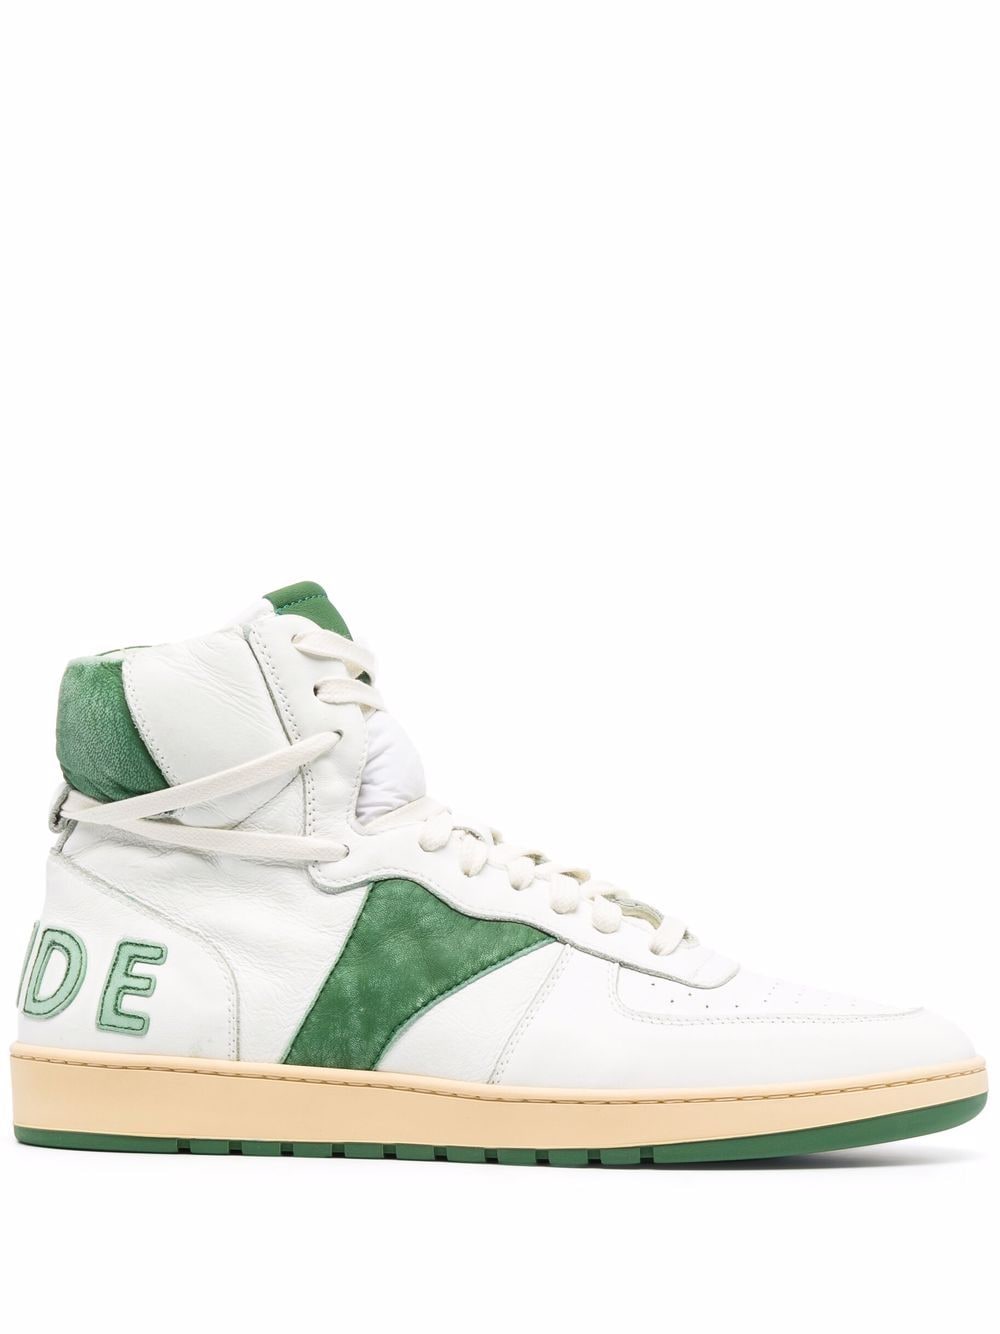 RHUDE Rhecess leather high-top sneakers - White von RHUDE